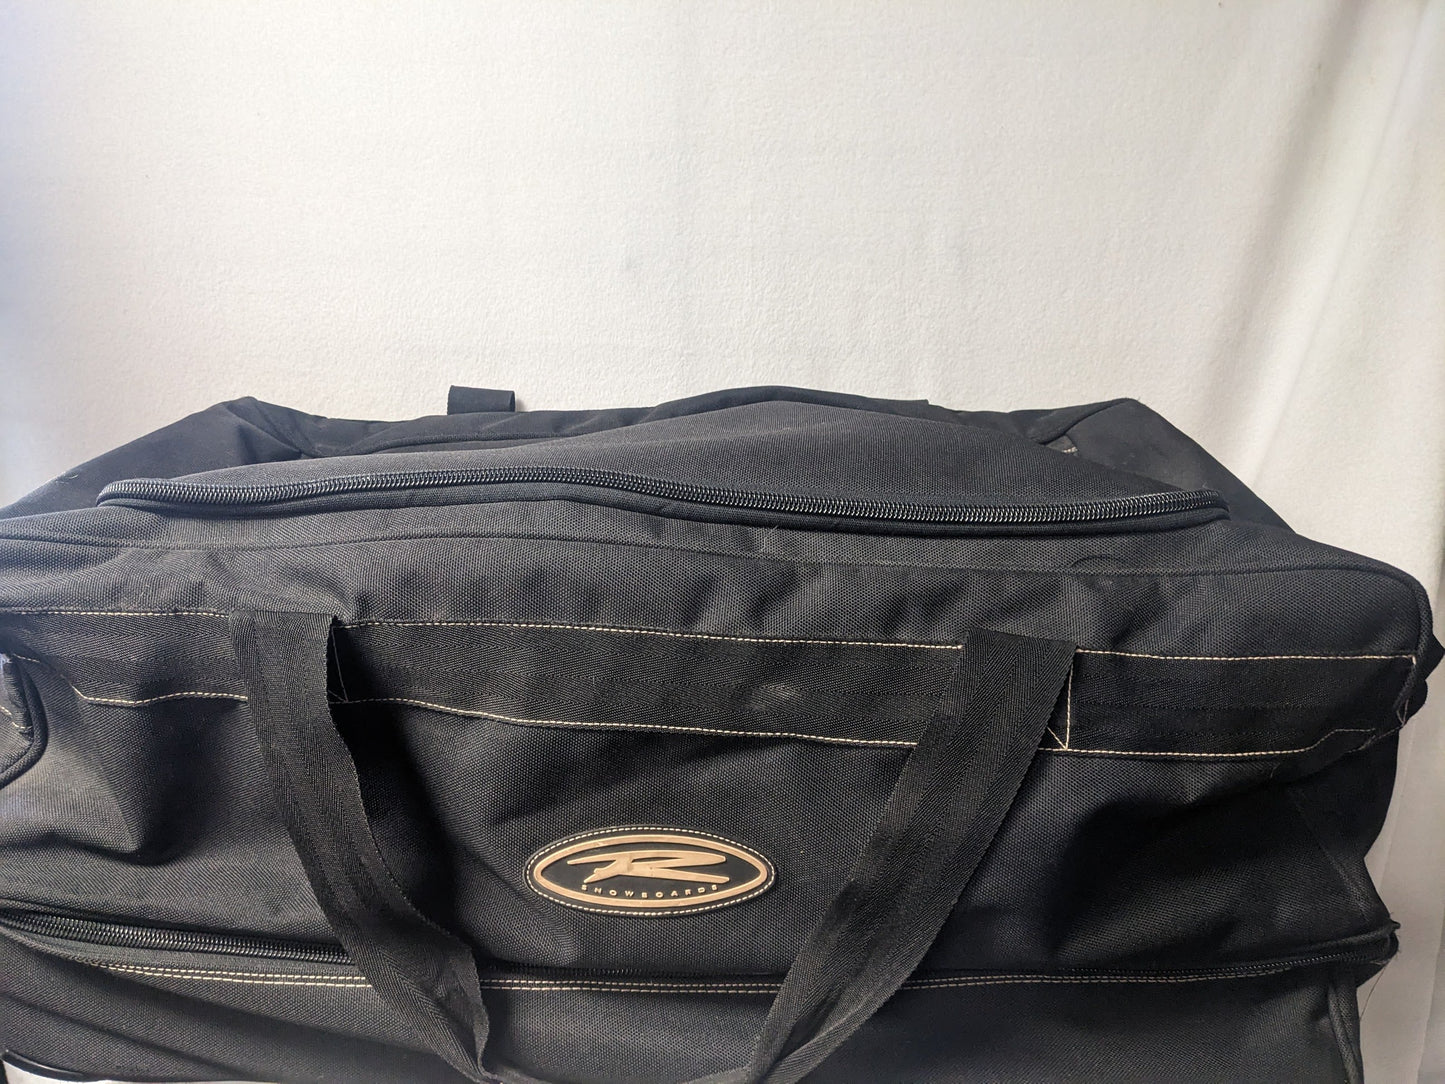 Rossignol Snowboard Roller Gear Bag Size 30 In x15 In x15 In Color Black Condition Used